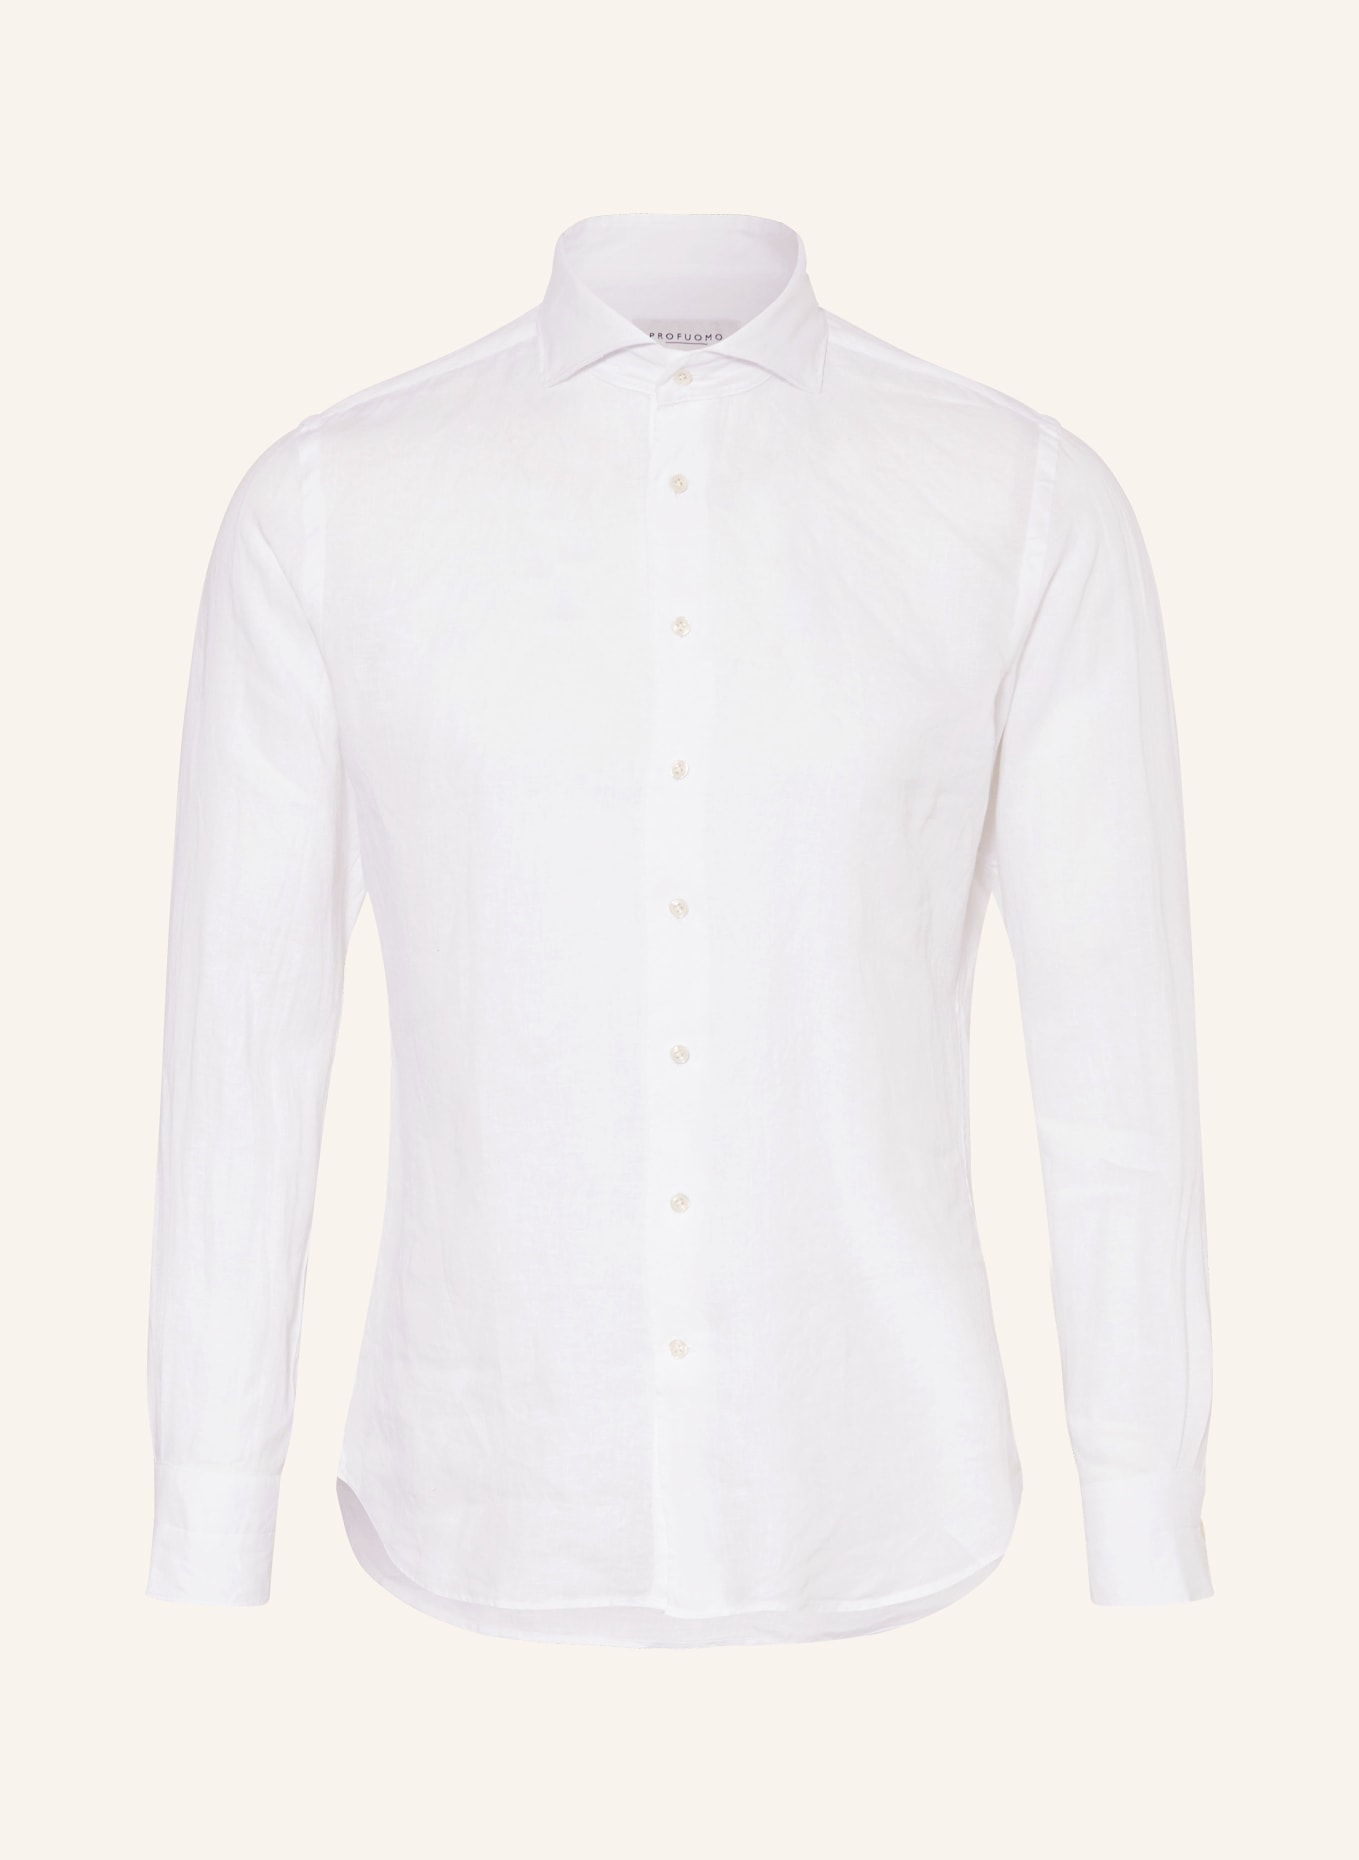 PROFUOMO Linen shirt regular fit, Color: WHITE (Image 1)